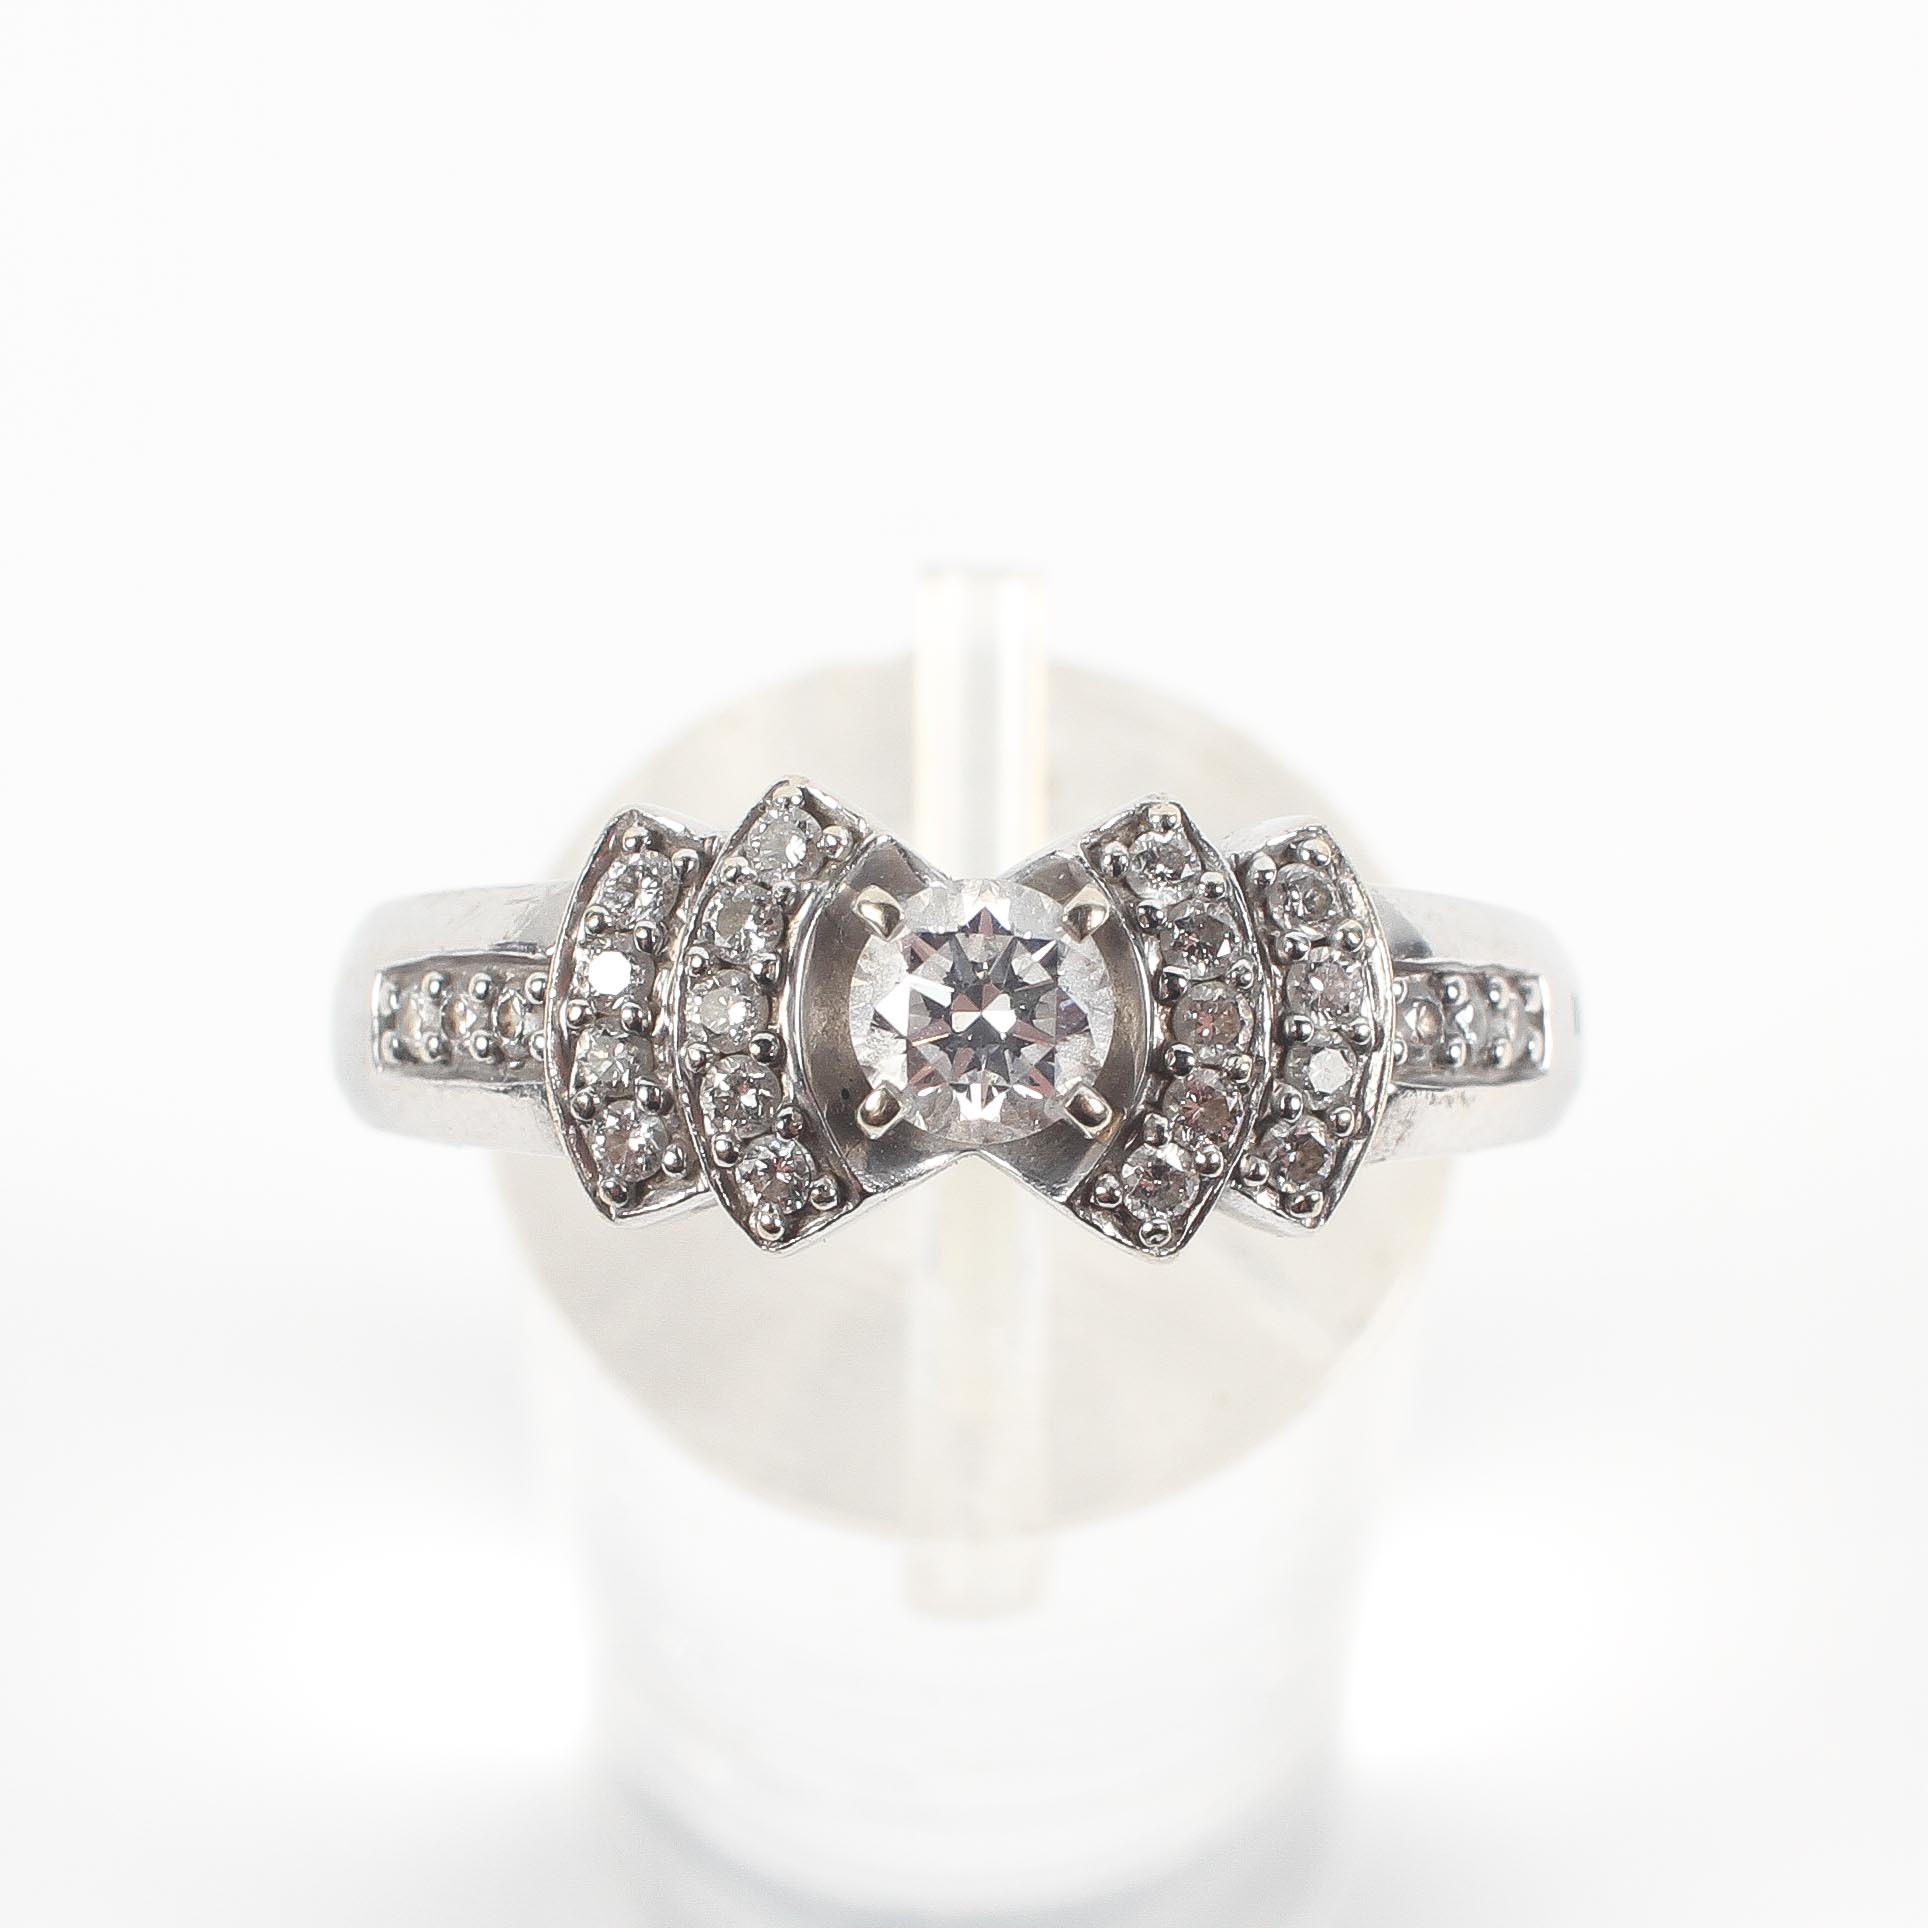 A white metal ring principally set with a round brilliant cut diamond estimated to weigh 0.25cts. - Image 2 of 3